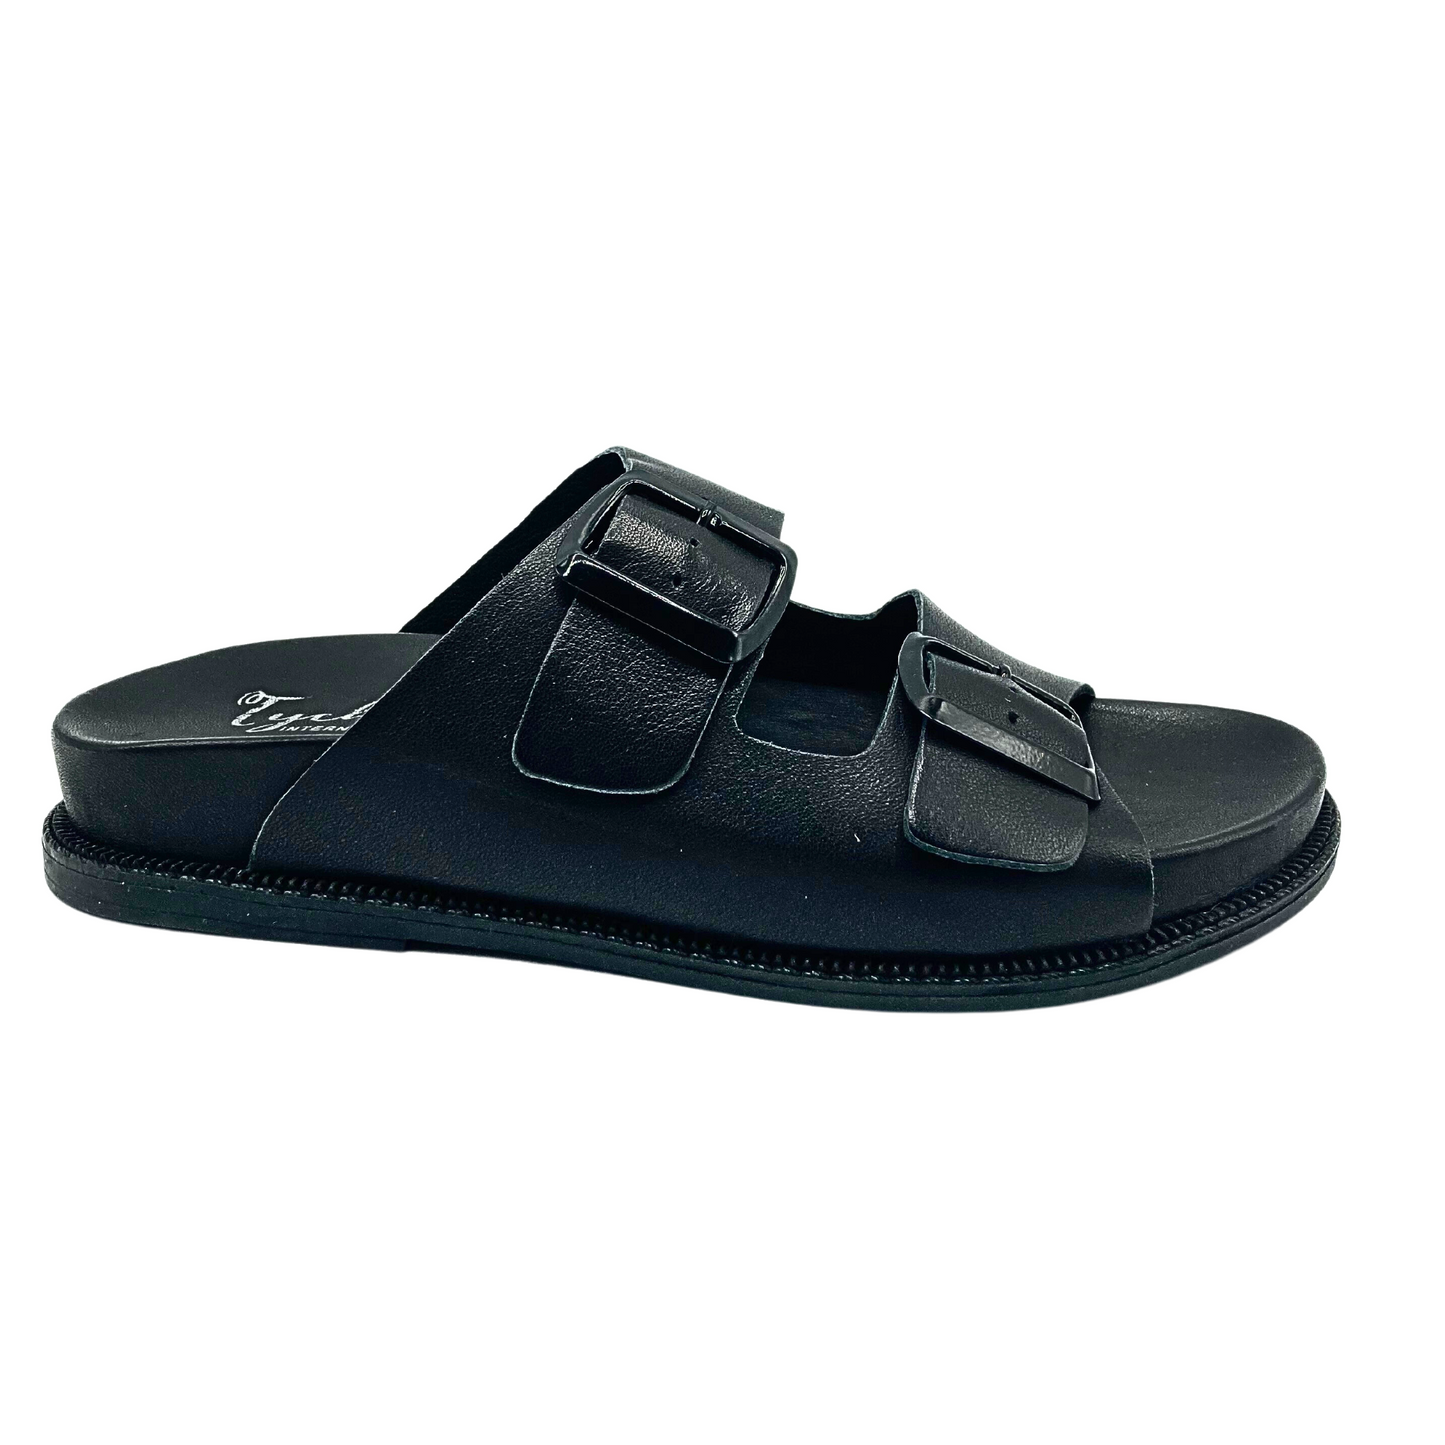 Outside view of slip on sandal.  Erogonomic insole.  Two wide, adjustable straps on top